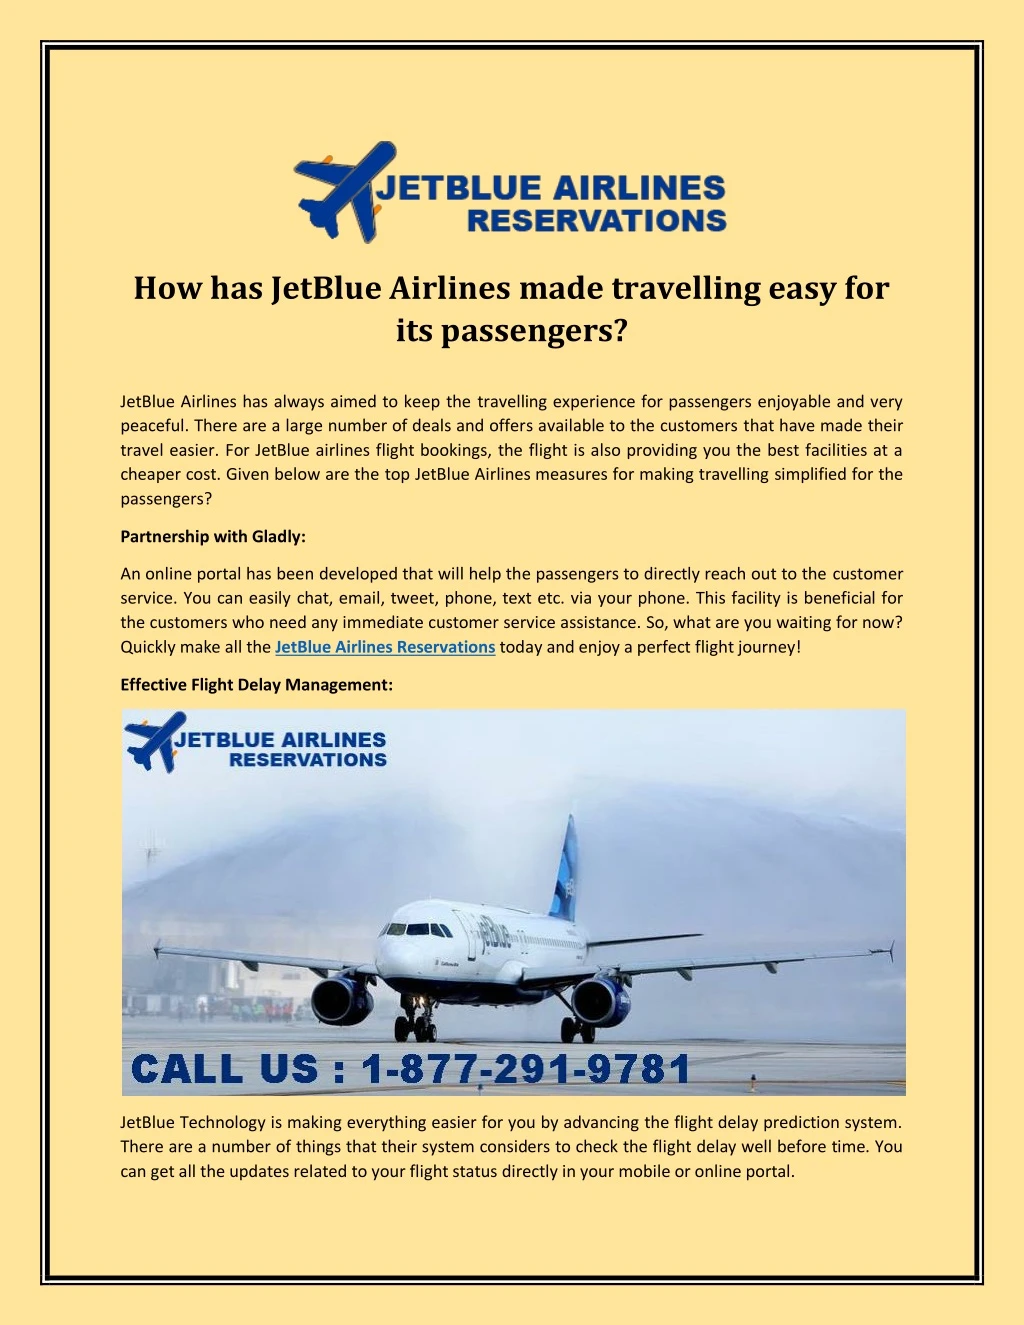 how has jetblue airlines made travelling easy